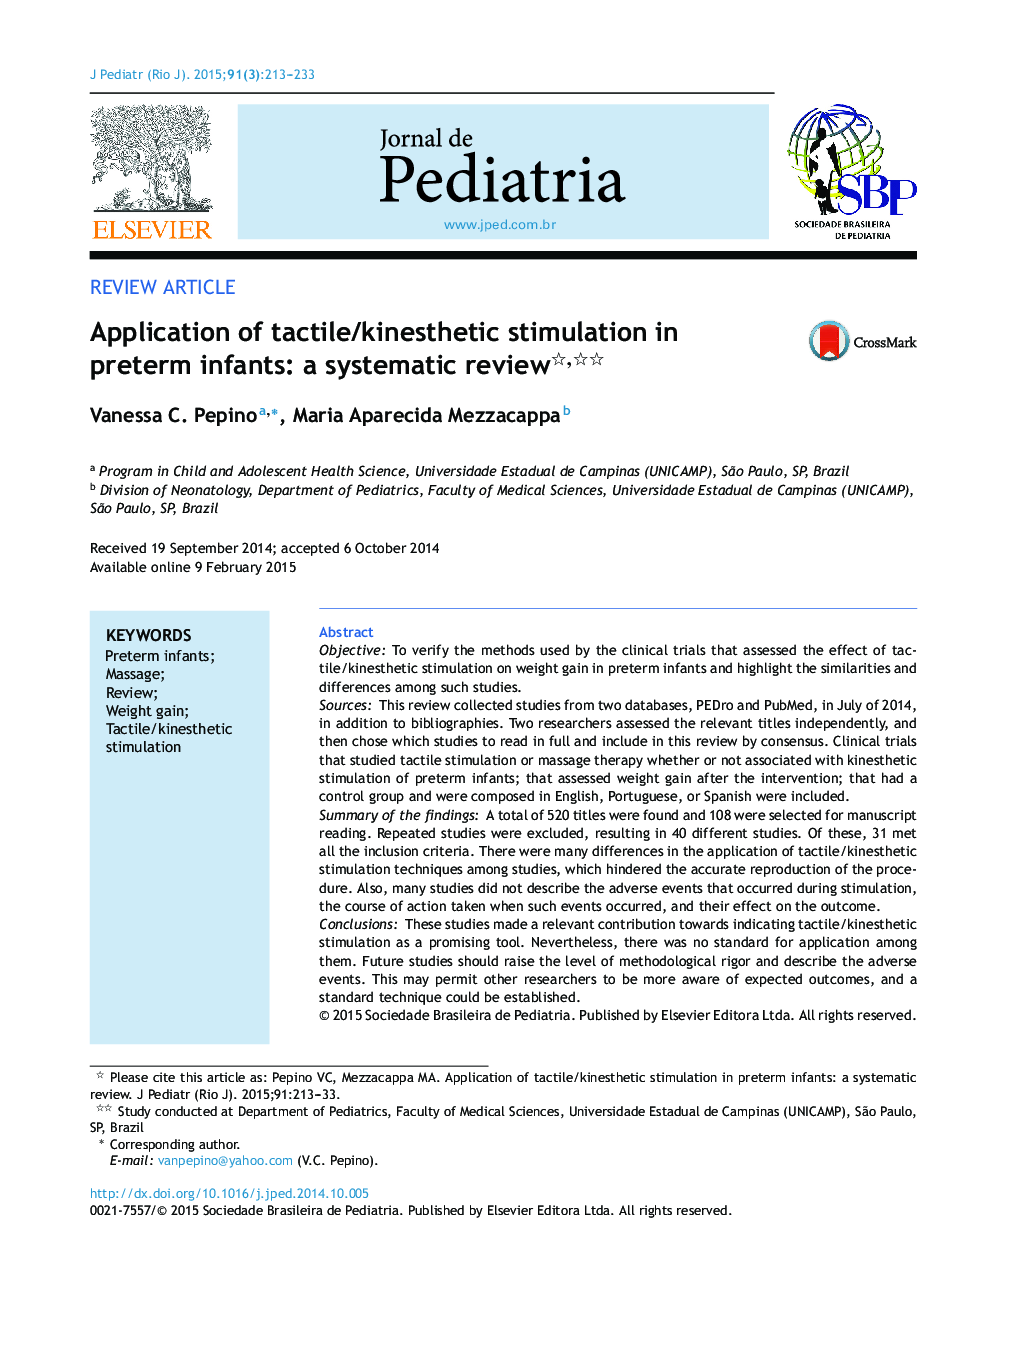 Application of tactile/kinesthetic stimulation in preterm infants: a systematic review 